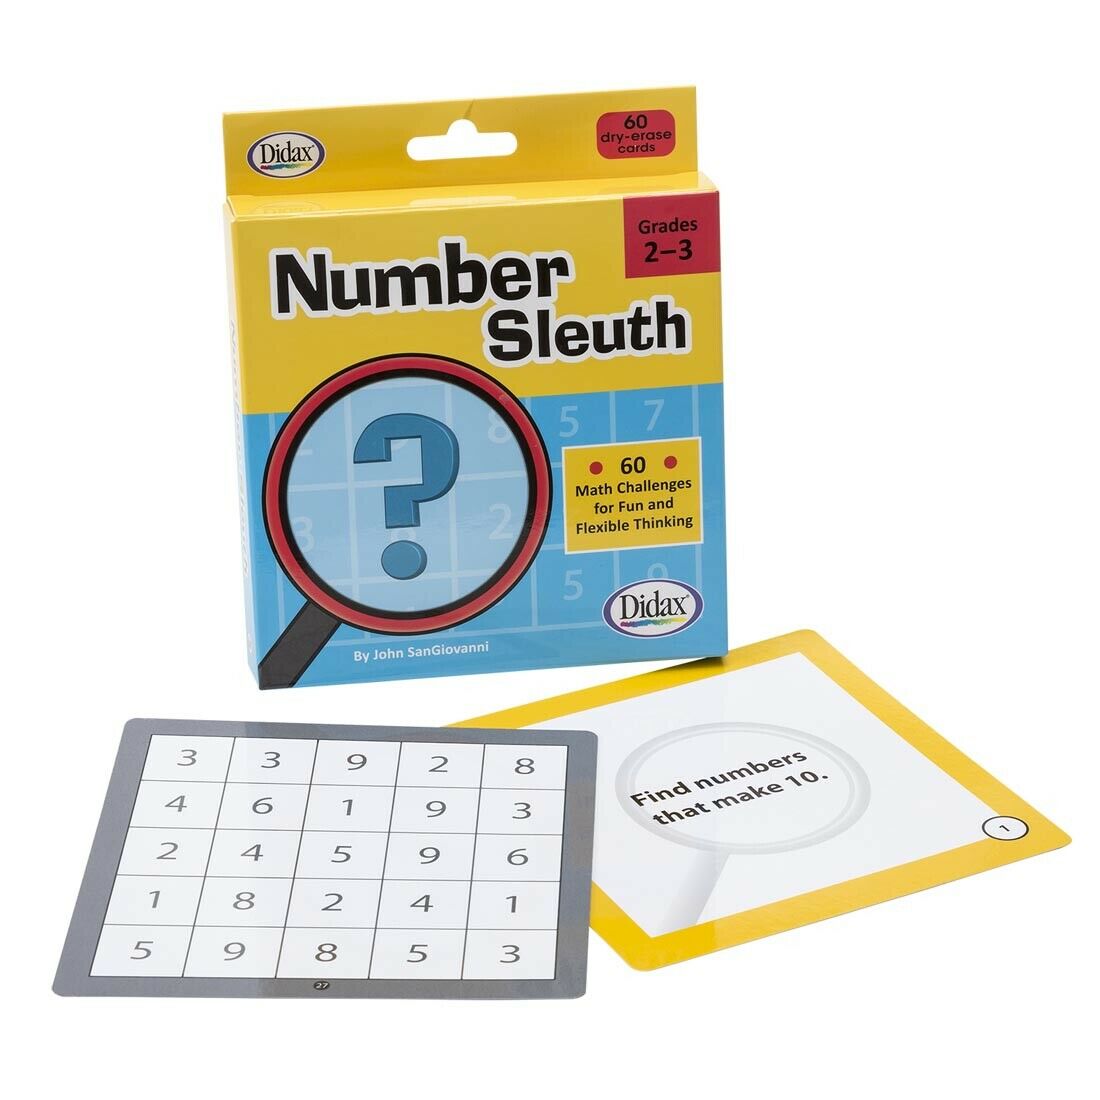 Picture of Didax DD-211744 GR 2-3 Number Sleuth Fluency Number Sense through Puzzle & Play